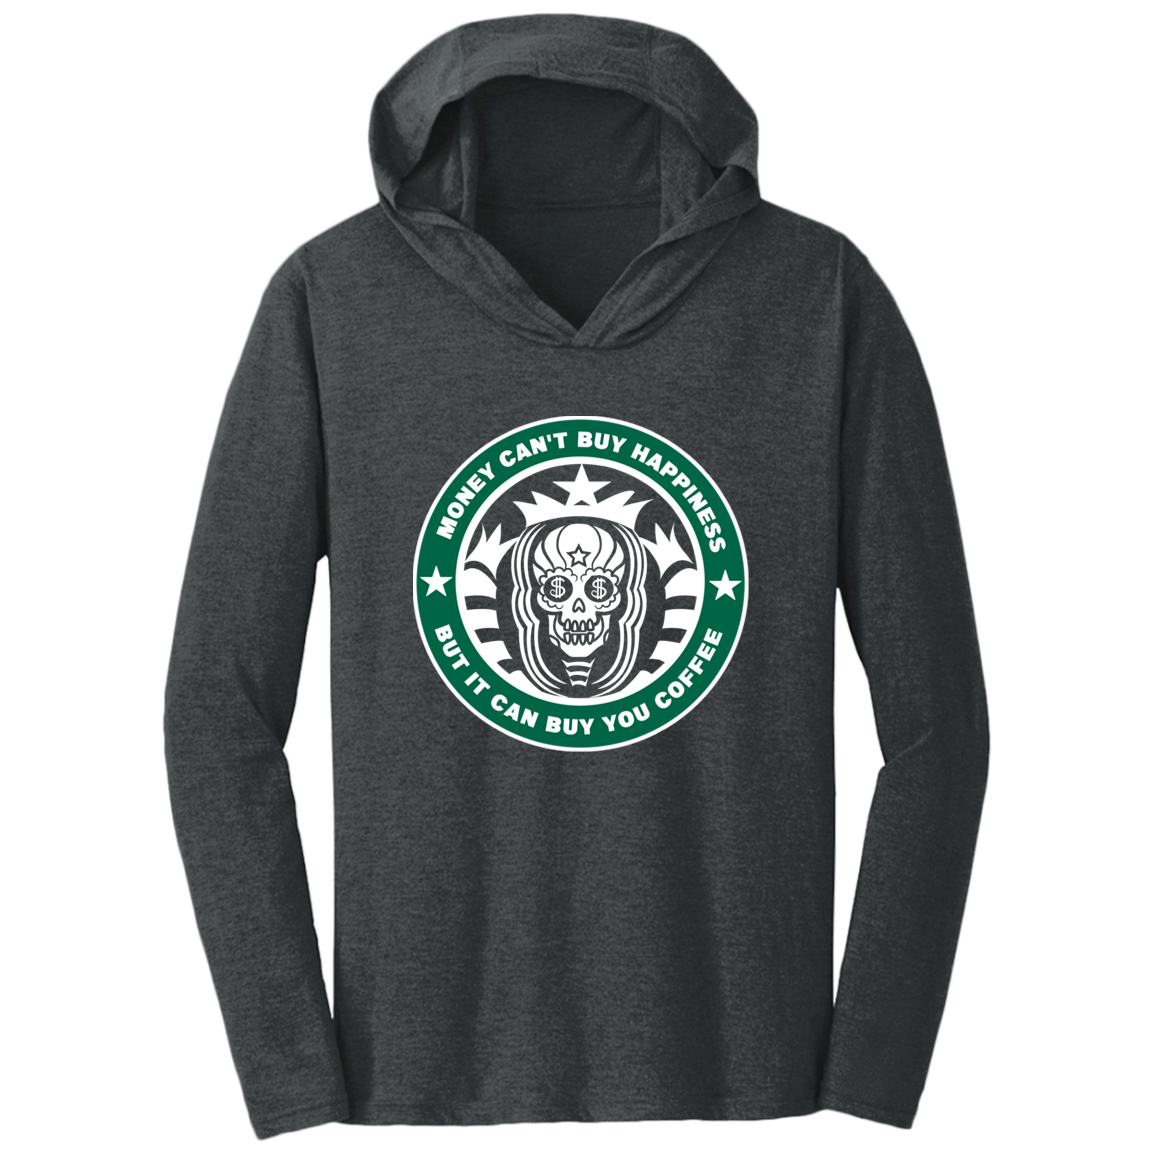 ArtichokeUSA Custom Design. Money Can't Buy Happiness But It Can Buy You Coffee. Triblend T-Shirt Hoodie